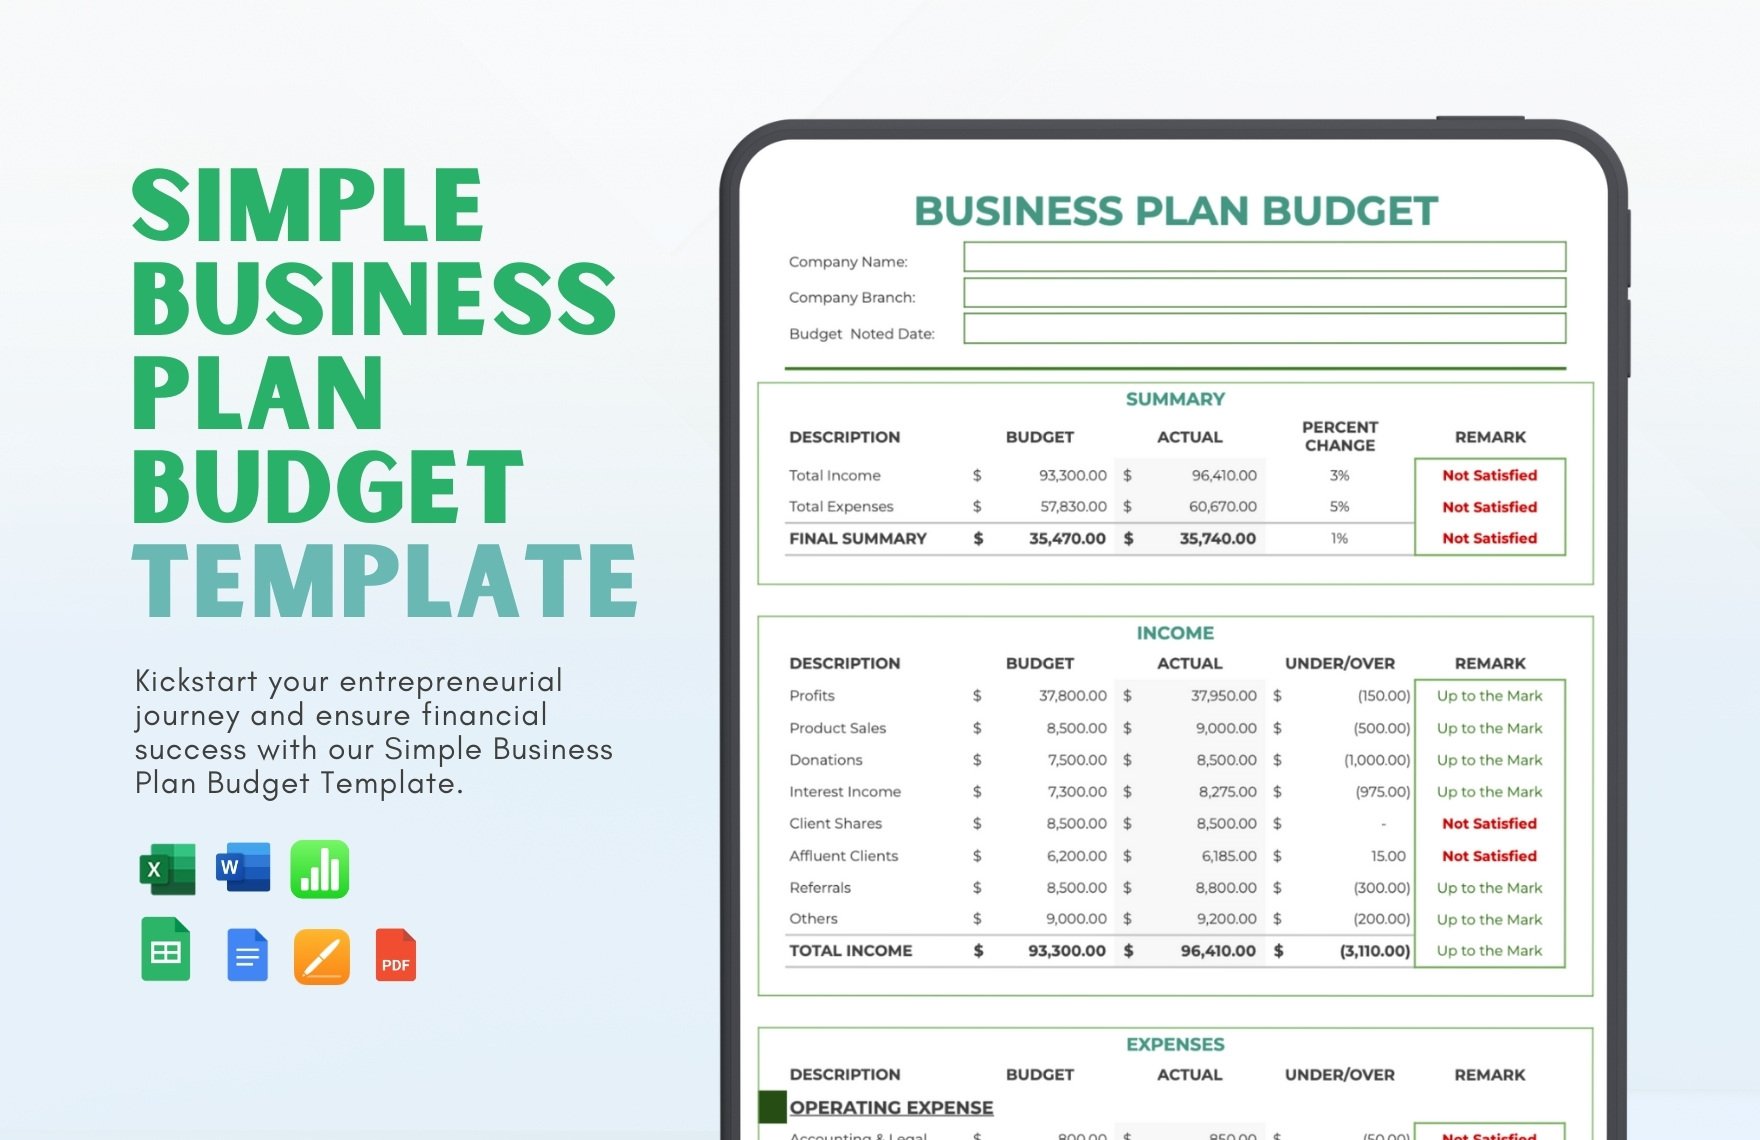 Simple Business Plan Budget Template